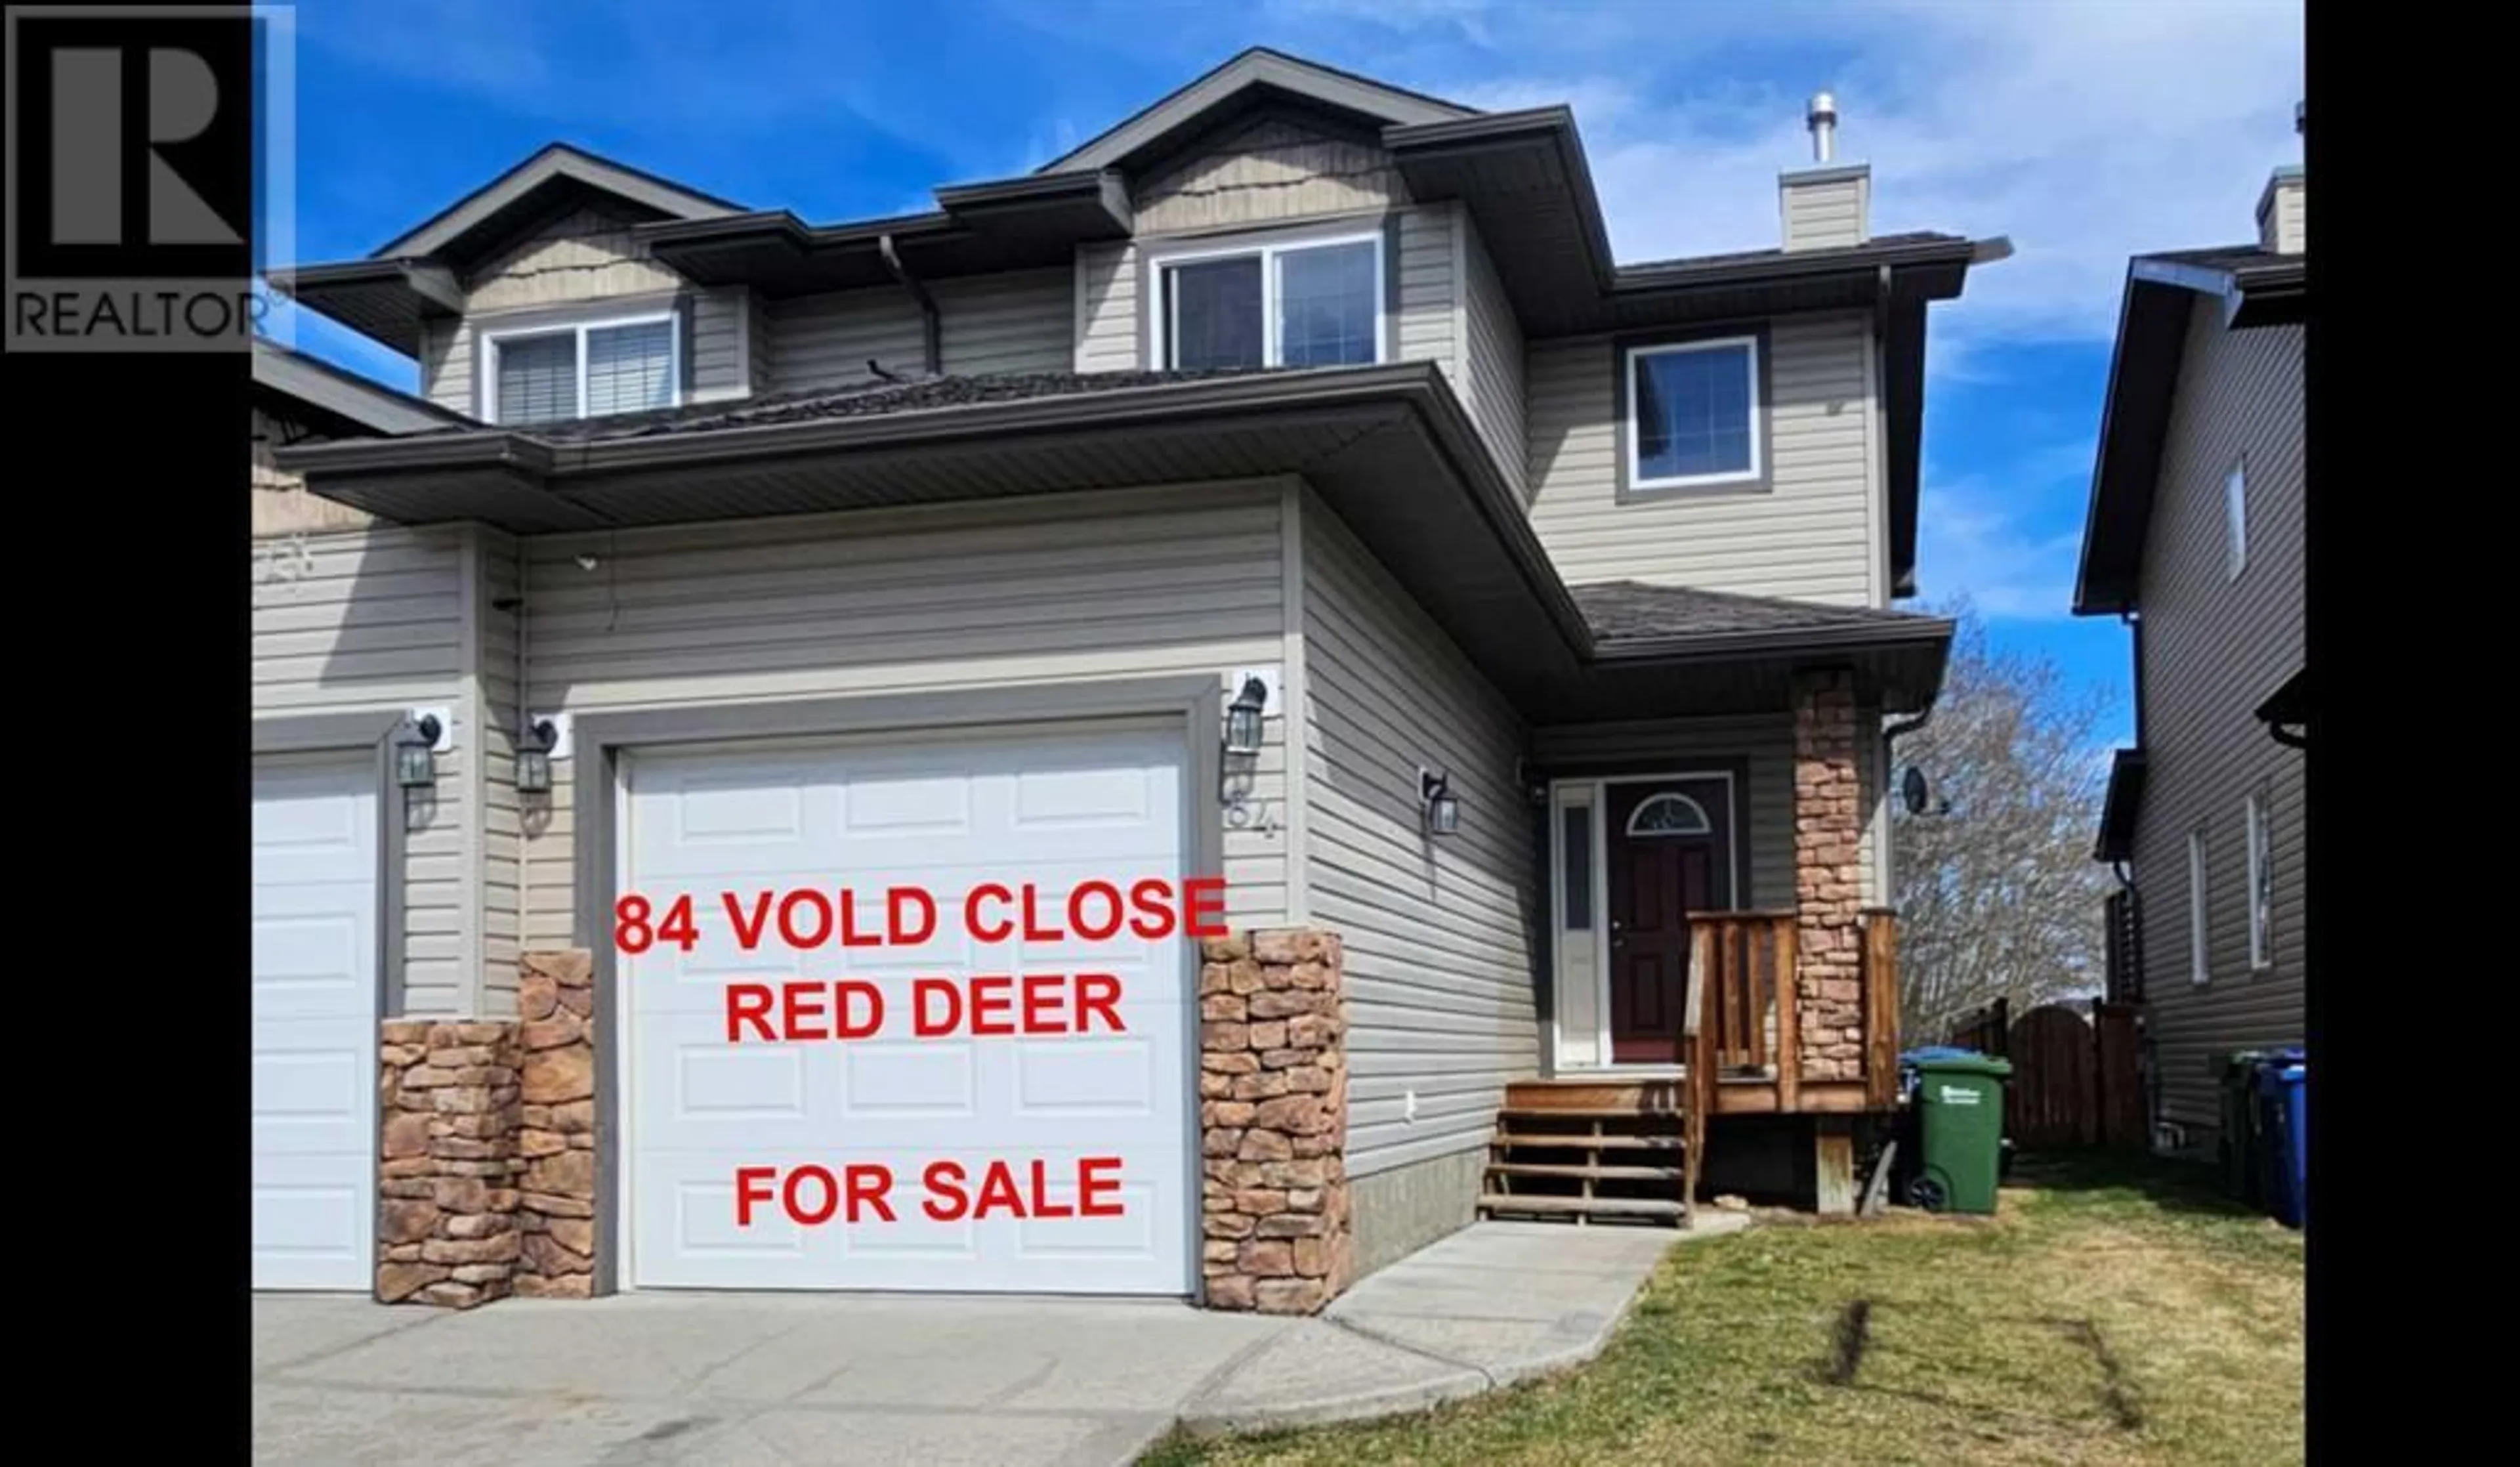 Frontside or backside of a home for 84 VOLD Close, Red Deer Alberta T4R0G4